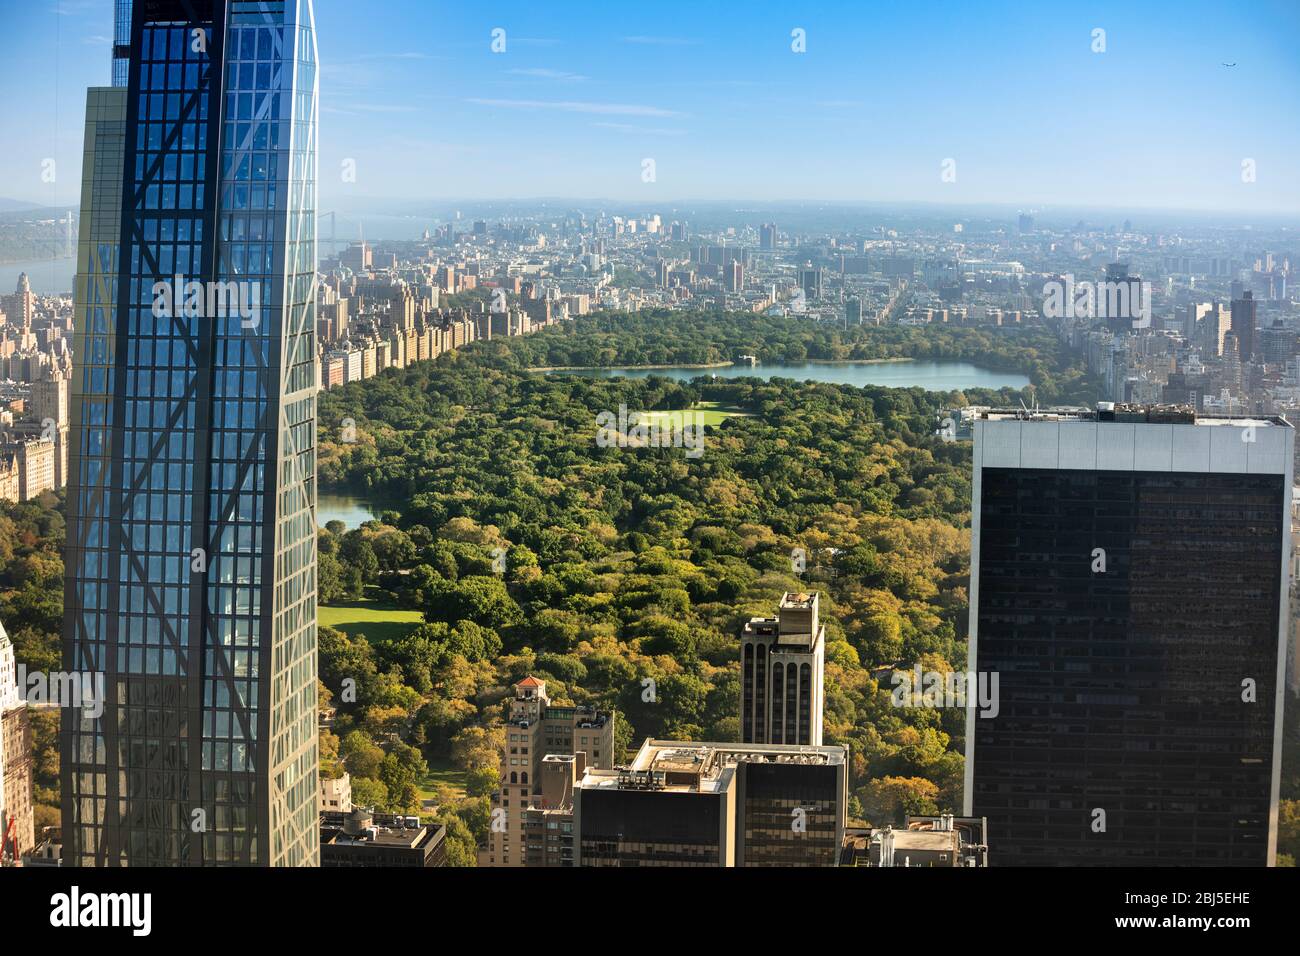 Aerial view of the buildings and skyscrapers over Central Park and the Manhattan skyline in New York City USA Stock Photo